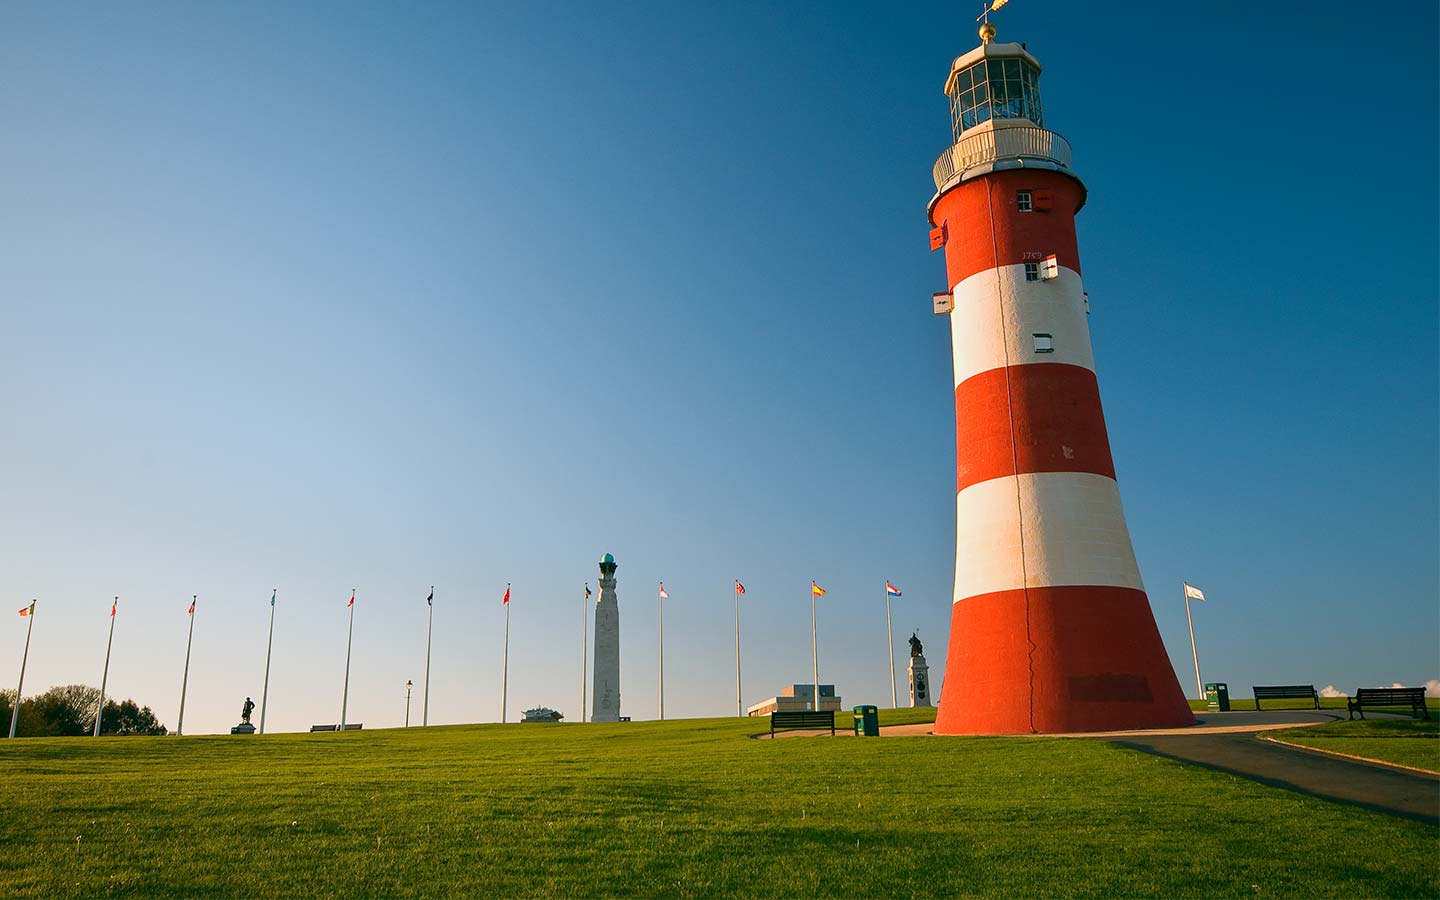 Smeatons tower lighthouse on Plymouth Hoe